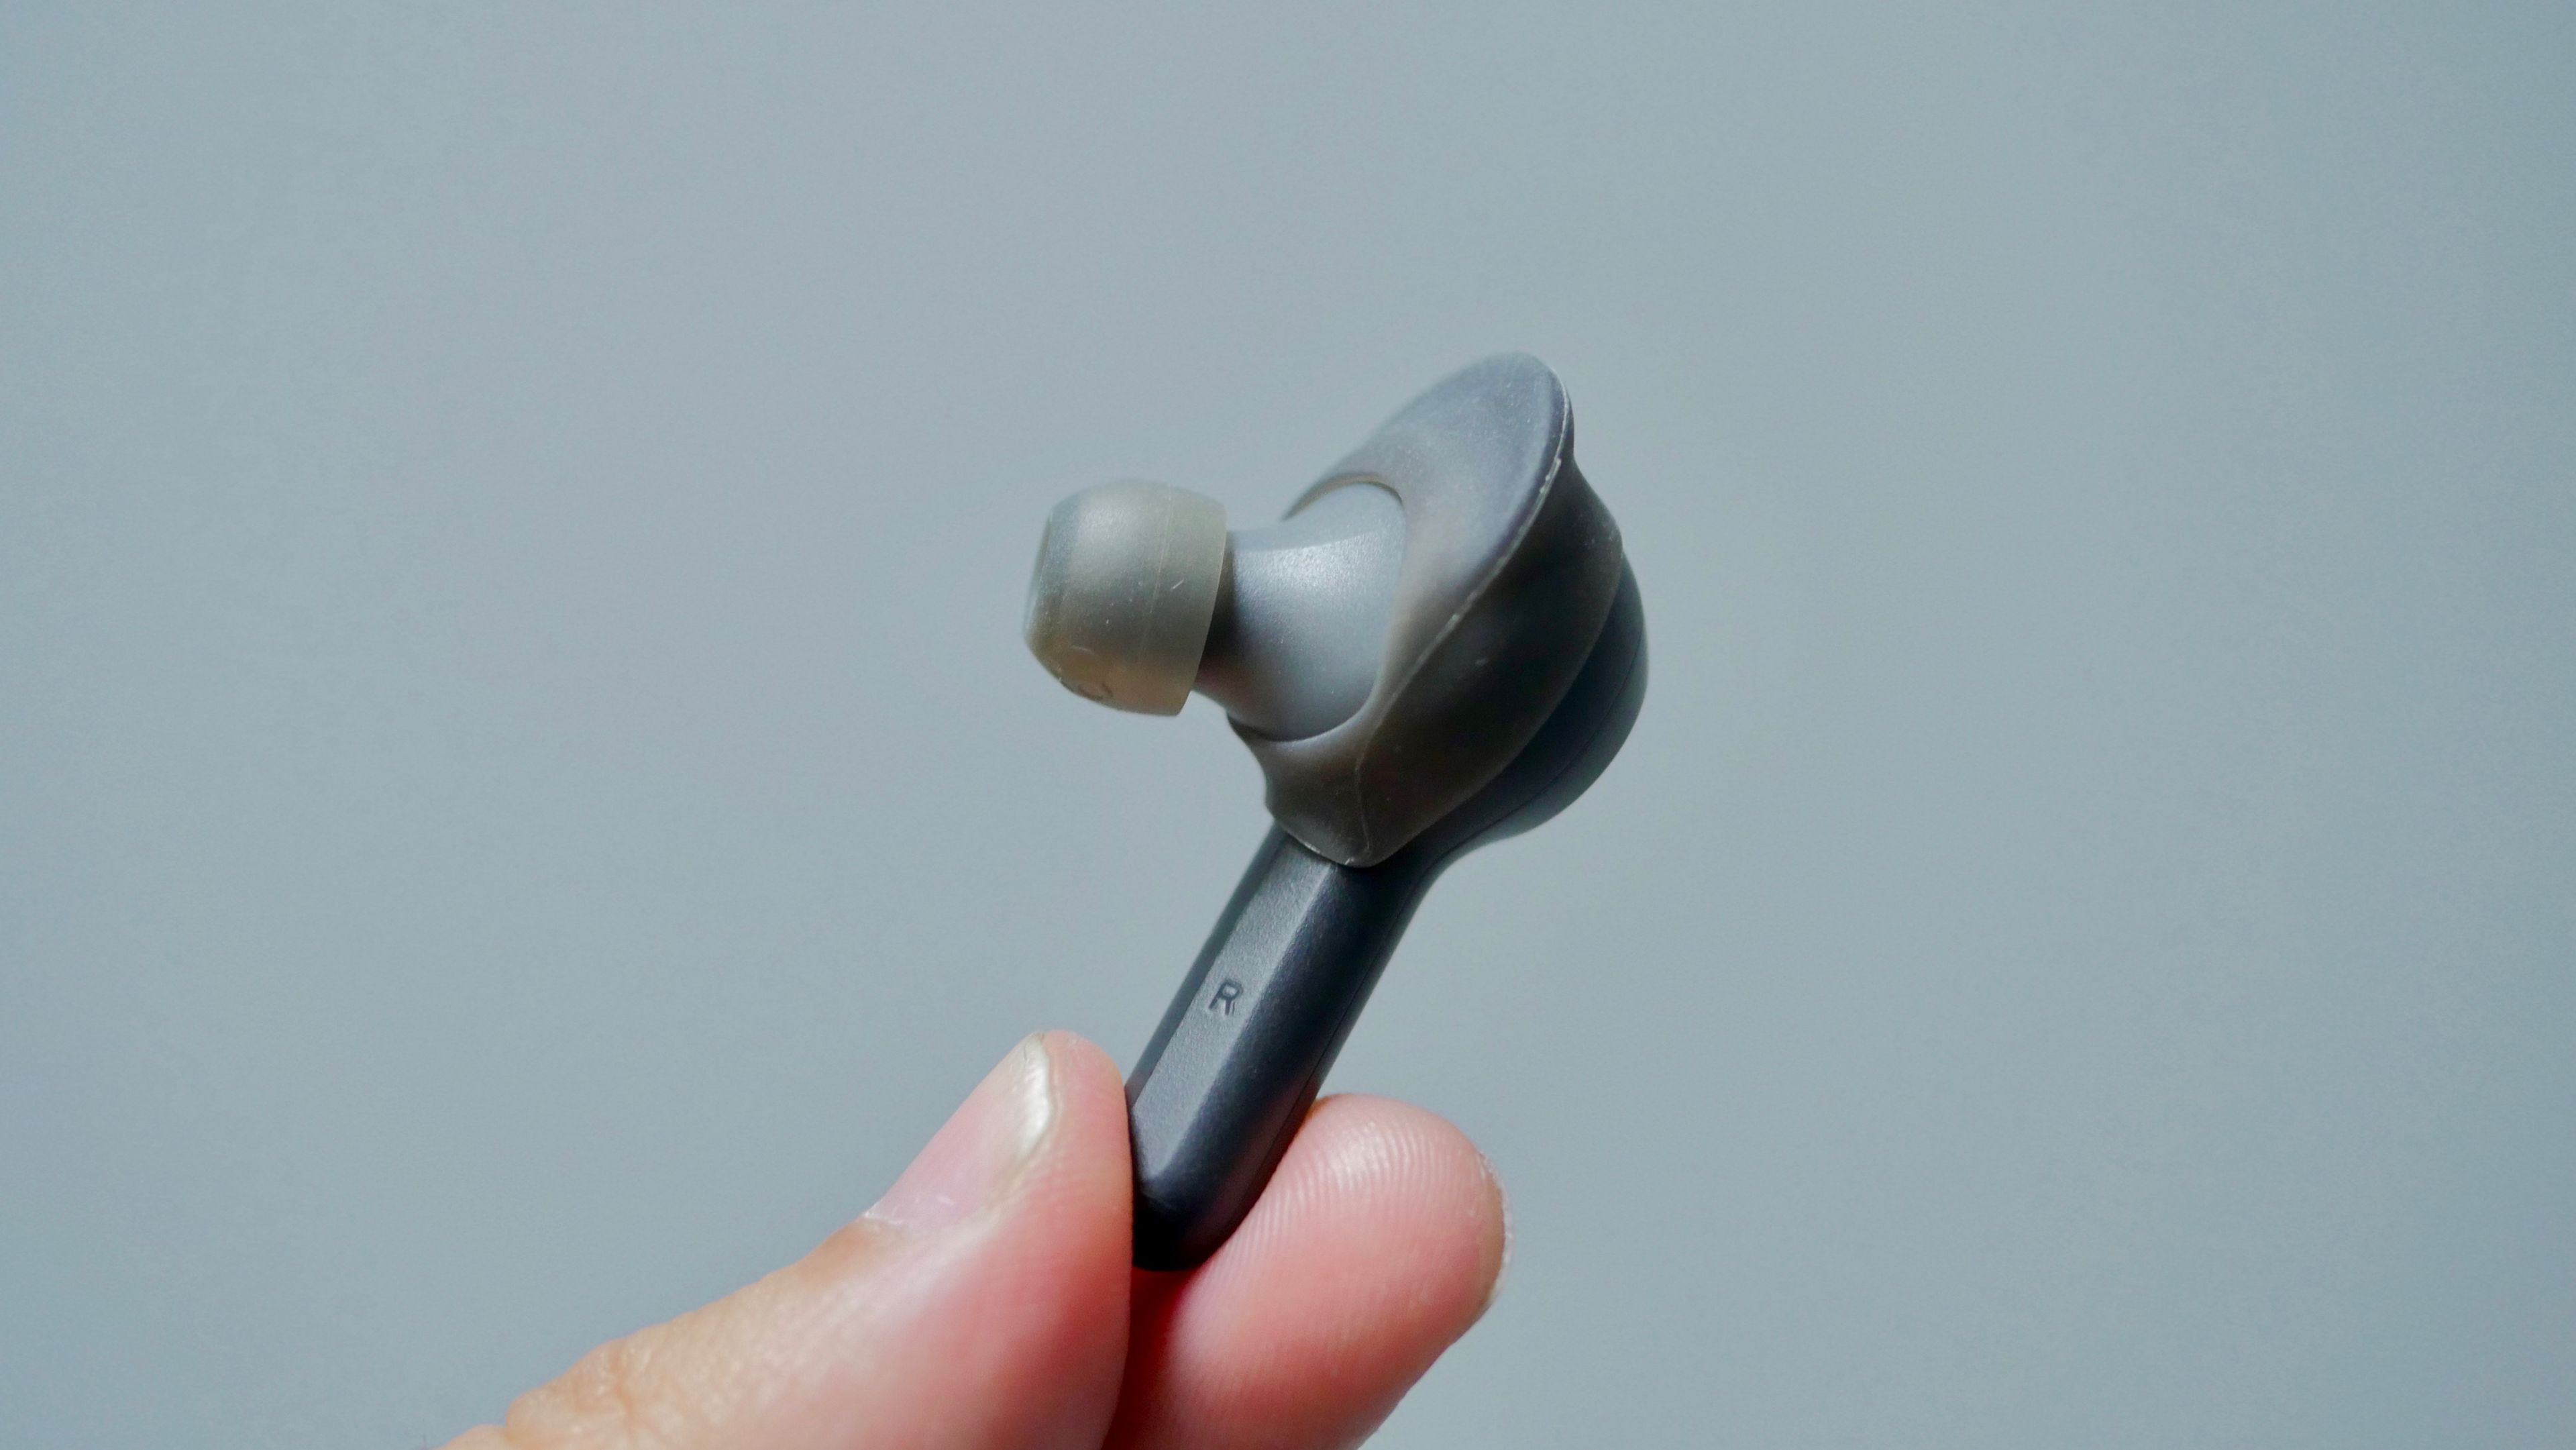 Skullcandy Indy review